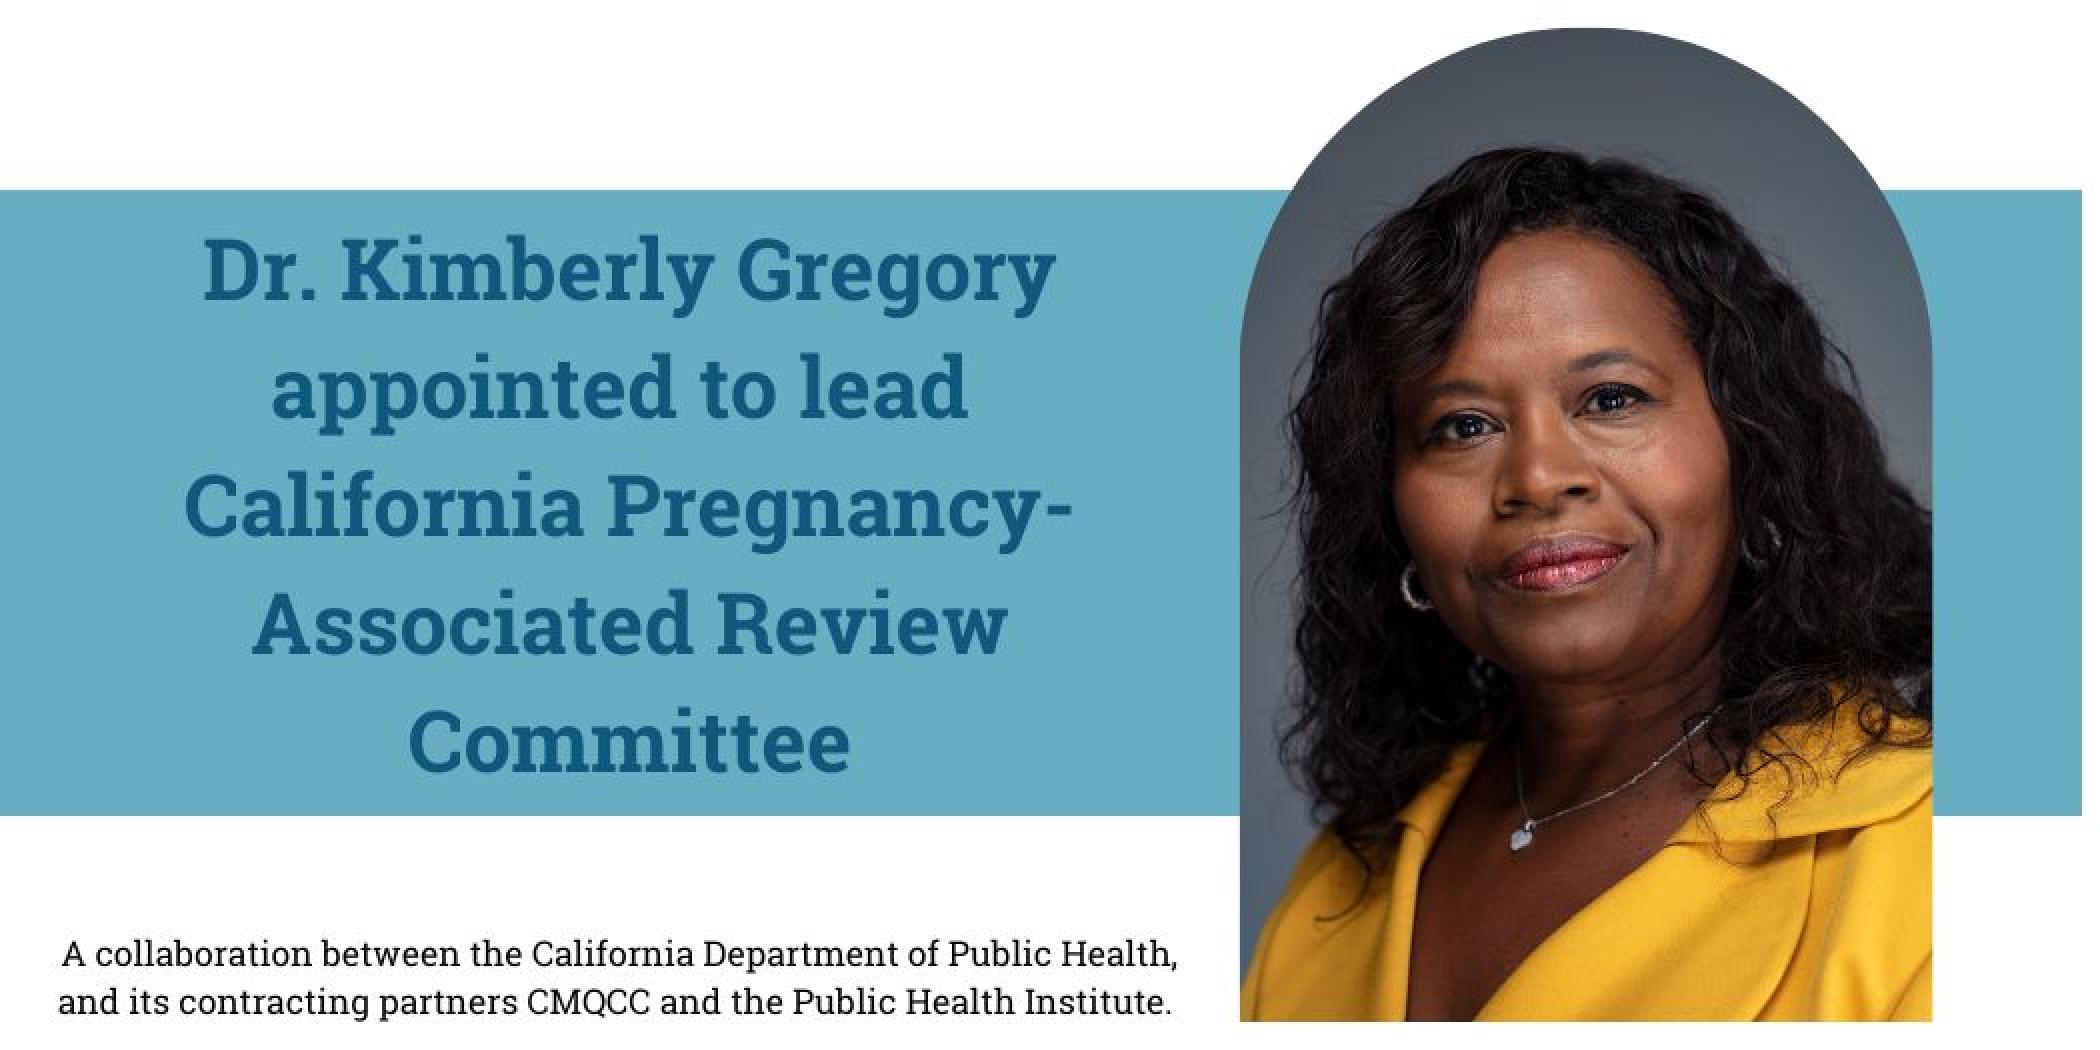 Photo of Dr. Kimberly Gregory and Headline: DR. Kimberly Gregory appointed to lead California Pregnancy-Associated Review Committee